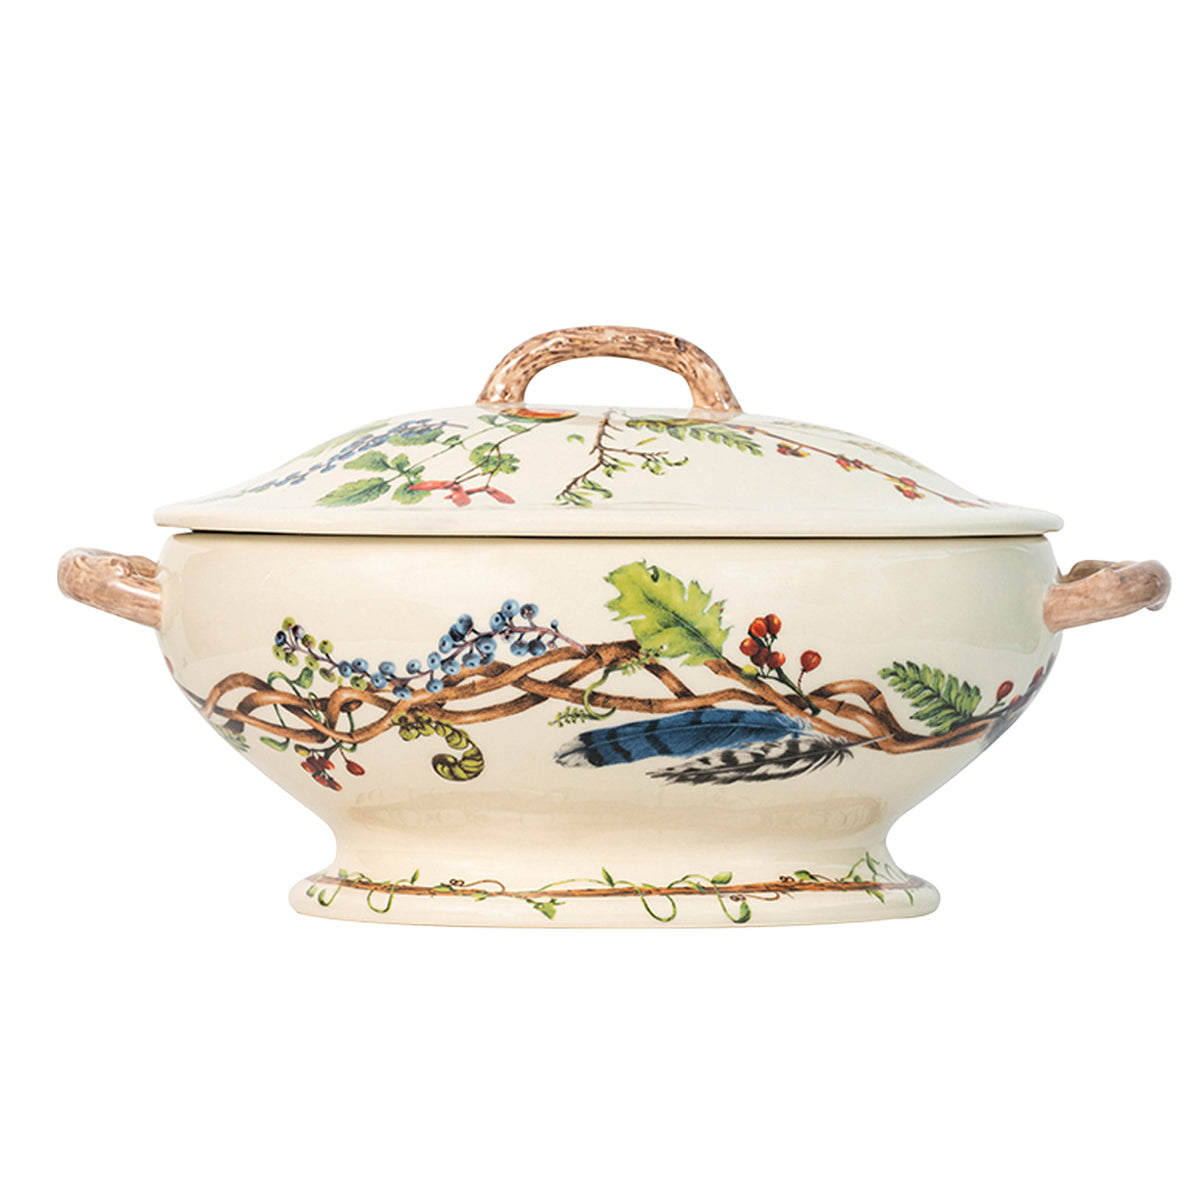 Abundantly scaled to serve a crowd, this bountifully sized, lidded tureen is a stunning showstopper to grace any table. With faux-wooden handles and our painterly forest floor motif, oohs and aahs of admiration are sure to accompany your best gameday stew or Thanksgiving stuffing.